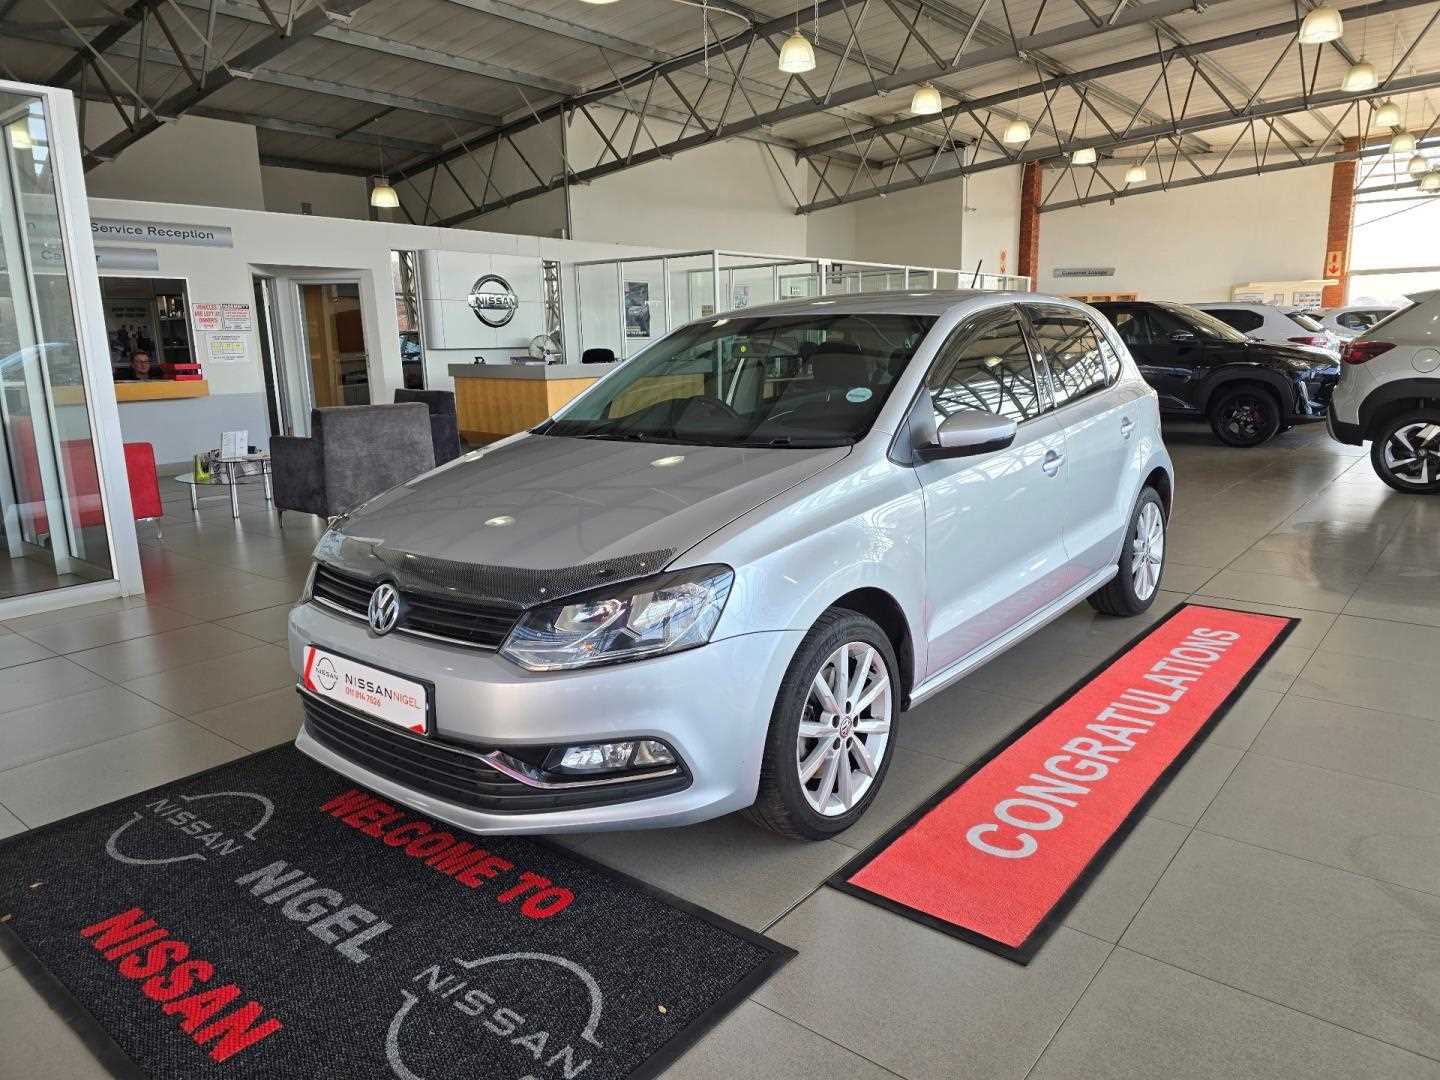 Volkswagen POLO GP 1.2 TSI HIGHLINE DSG (81KW) for Sale in South Africa